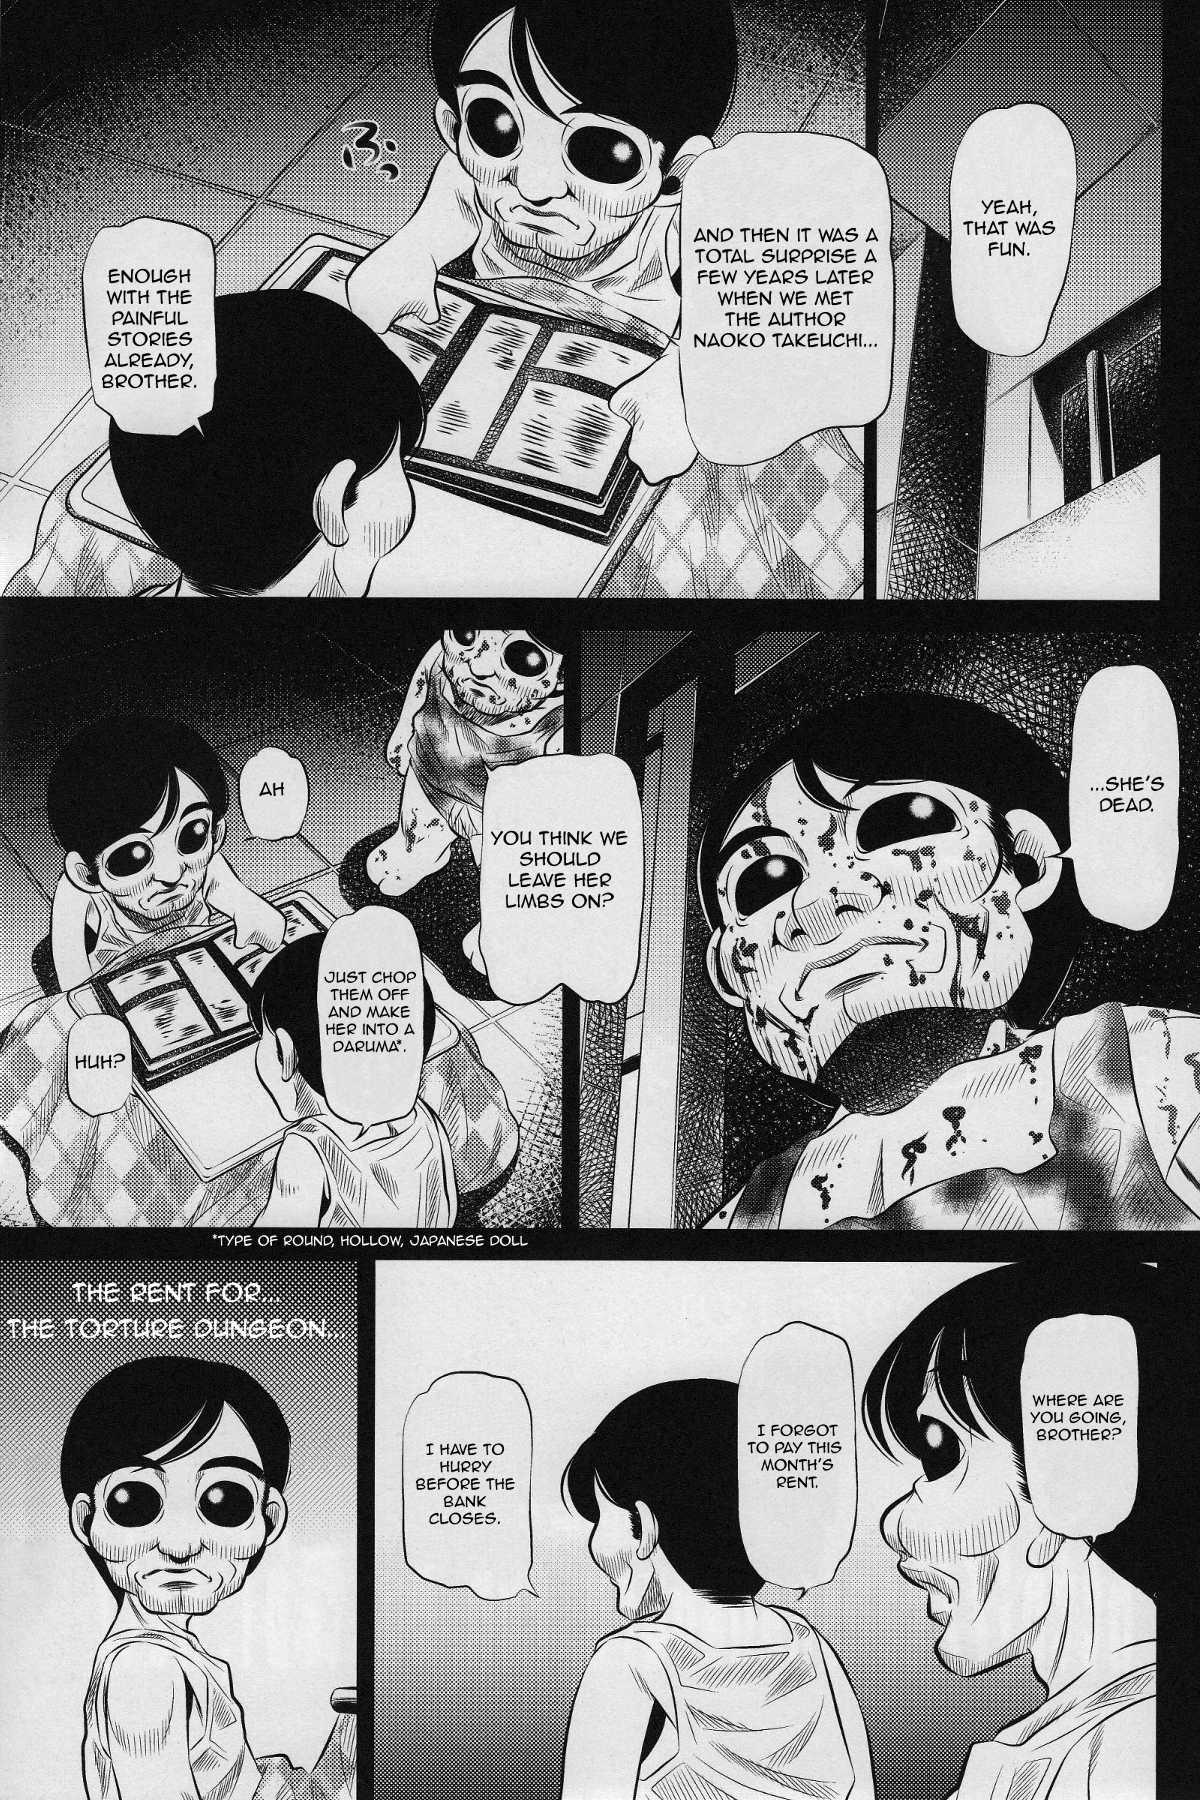 Teen Torture Dungeon – Sailor Moon Edition - Sailor moon Lesbian Porn - Page 25